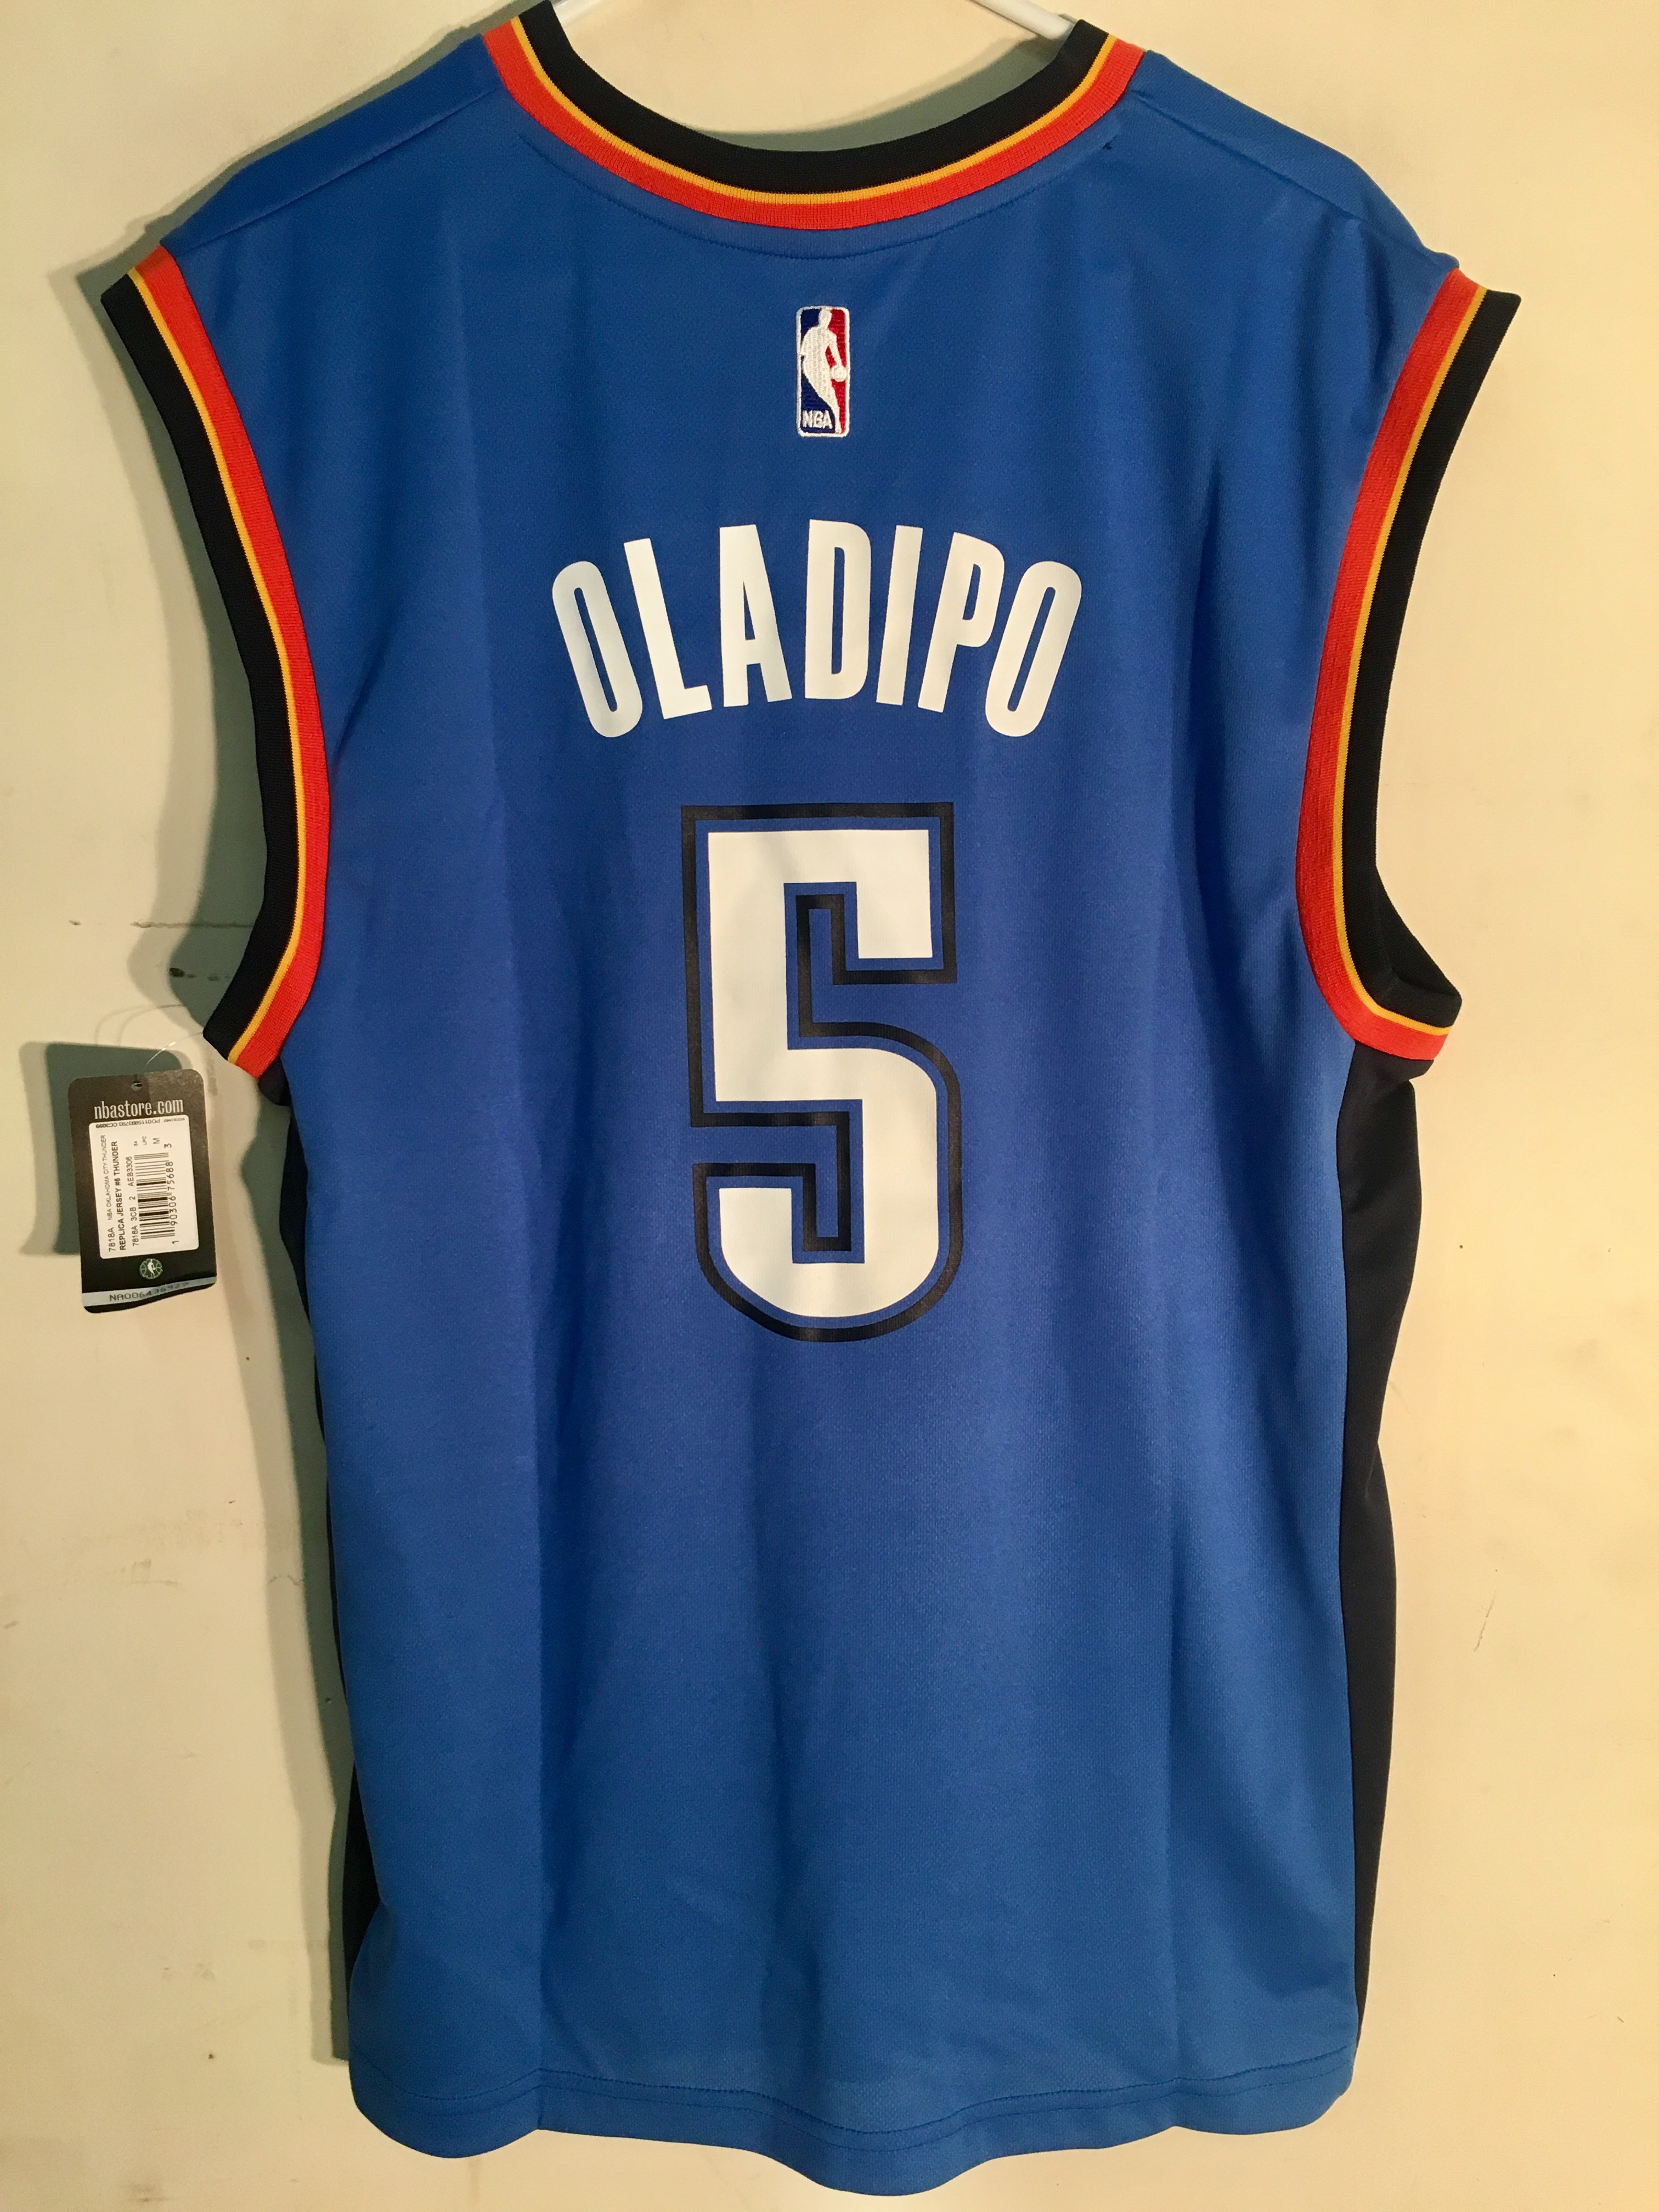 victor oladipo jersey number